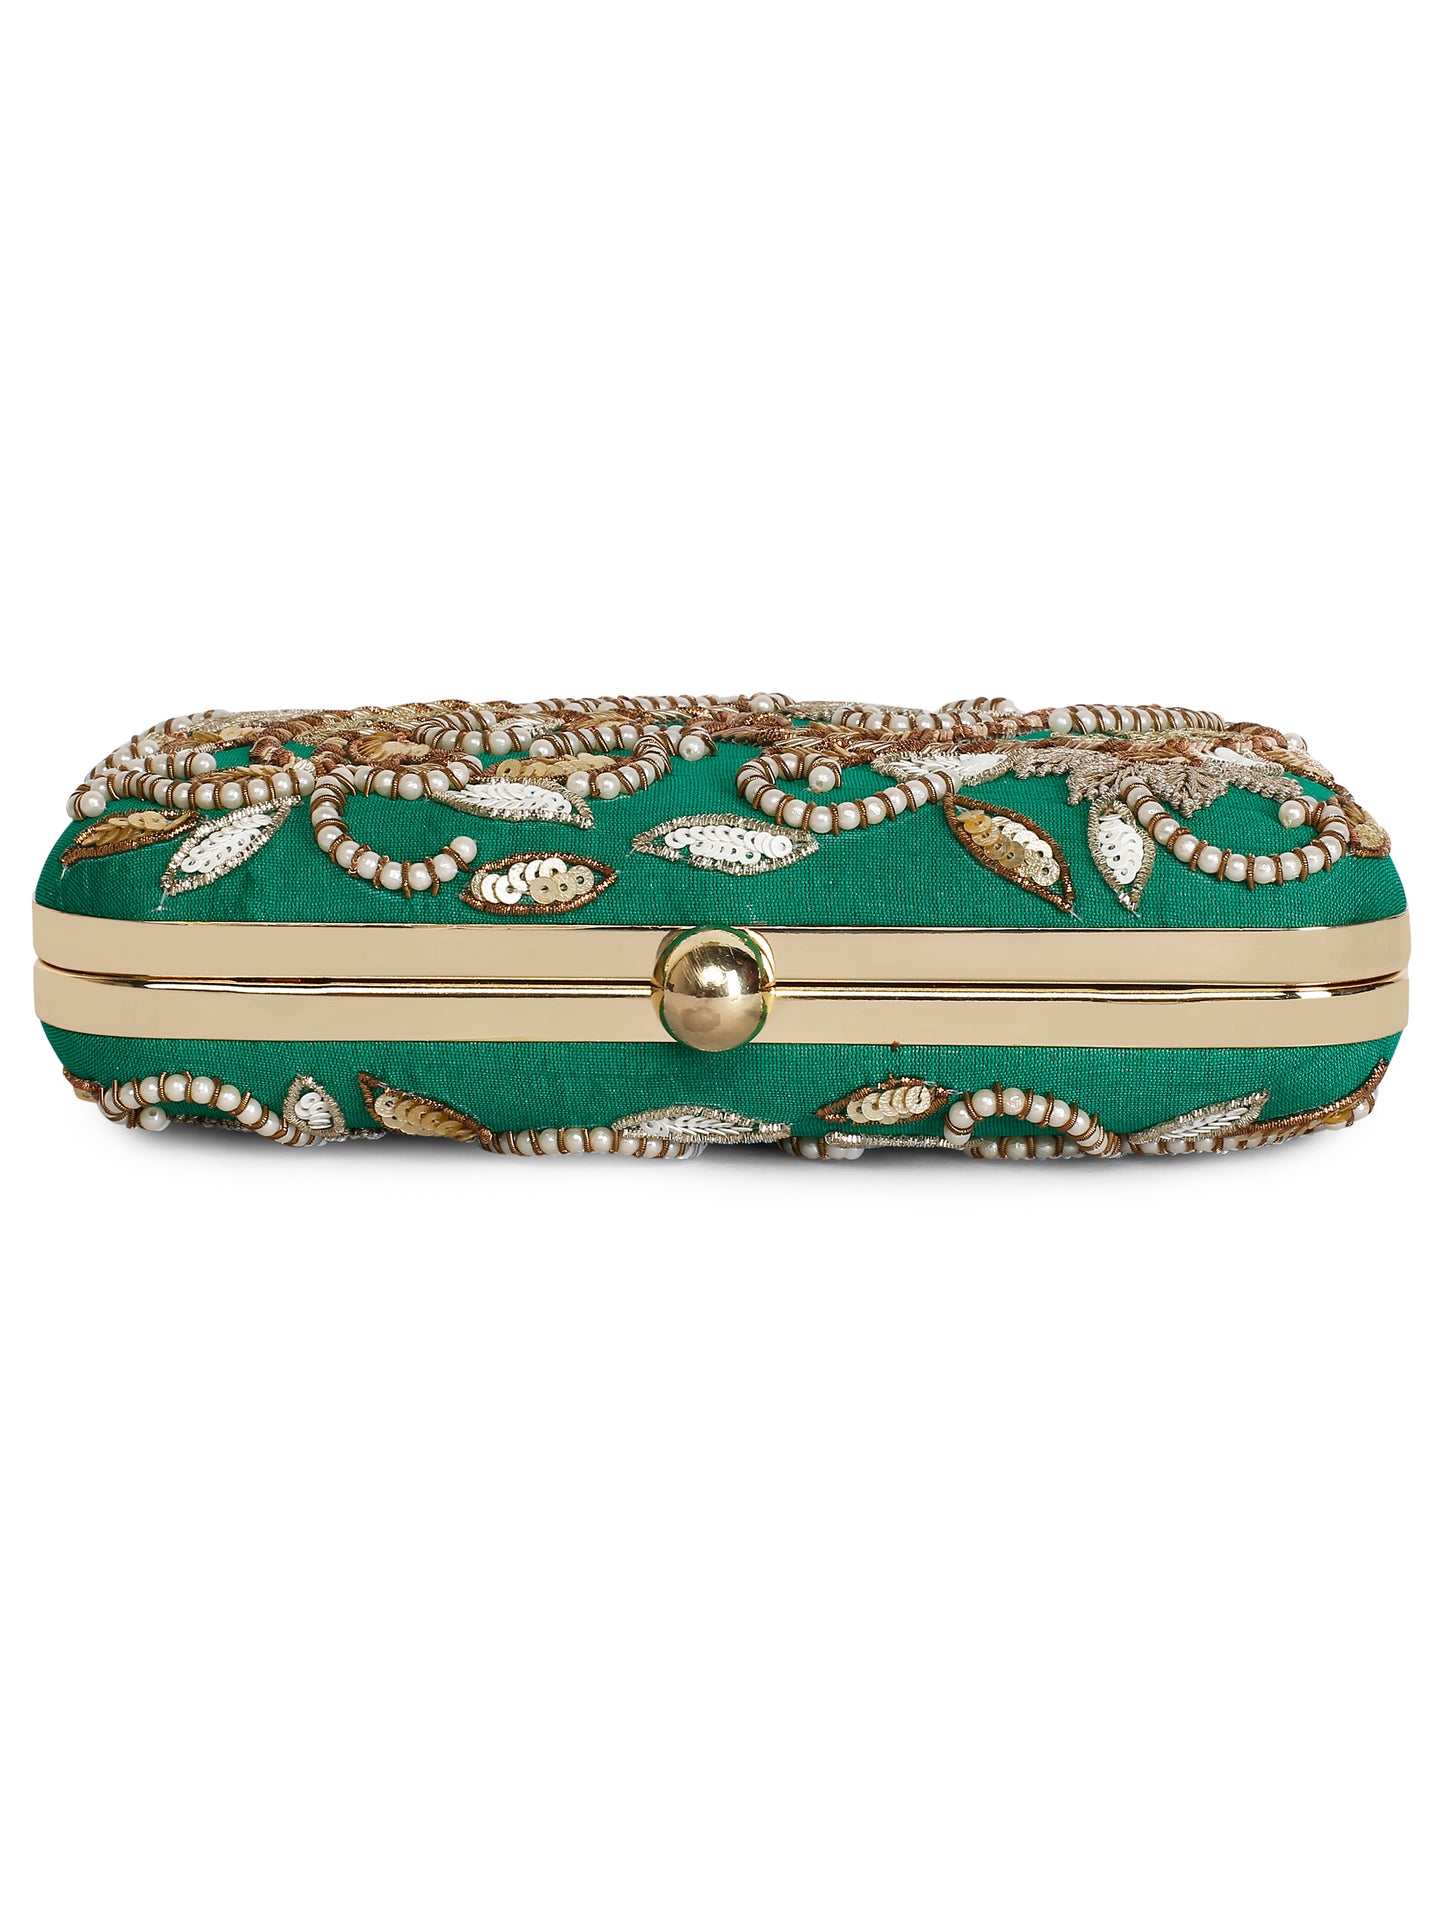 Double paisley green clutch